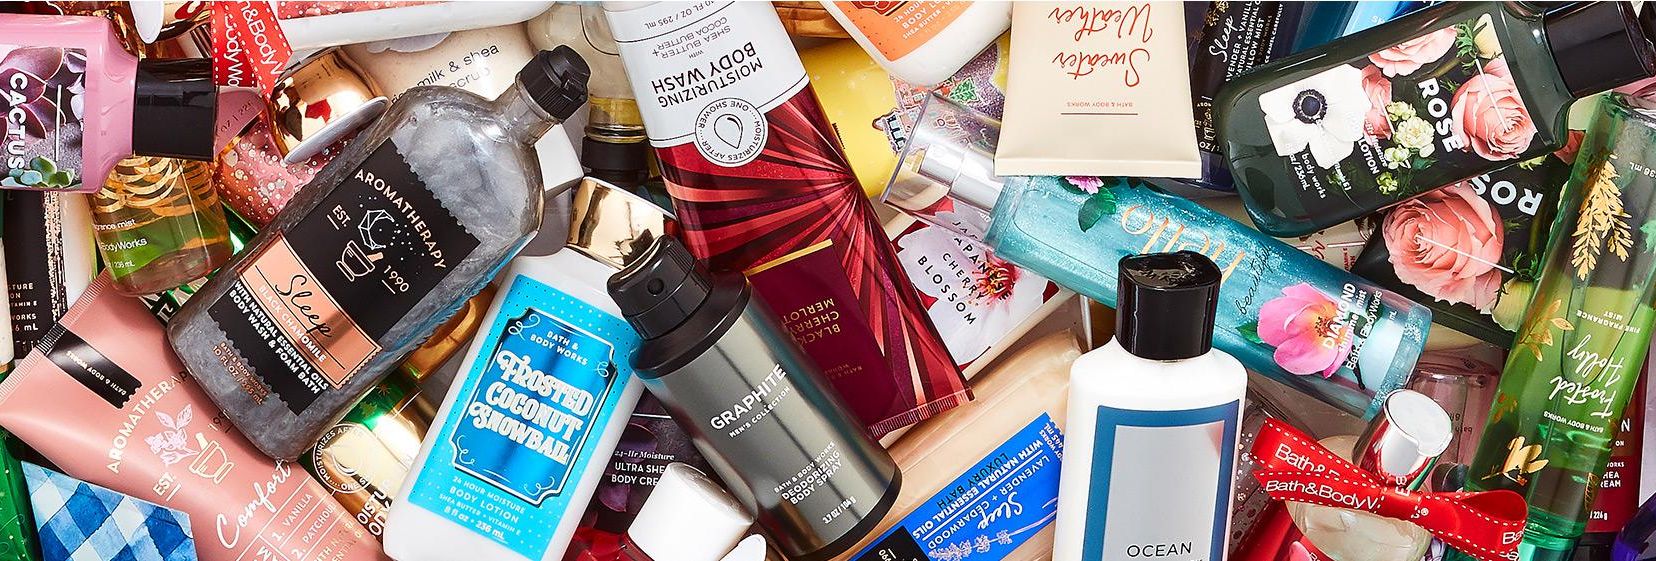 This Is Your Ideal Bath And Body Works Scent Based On Your Zodiac Sign